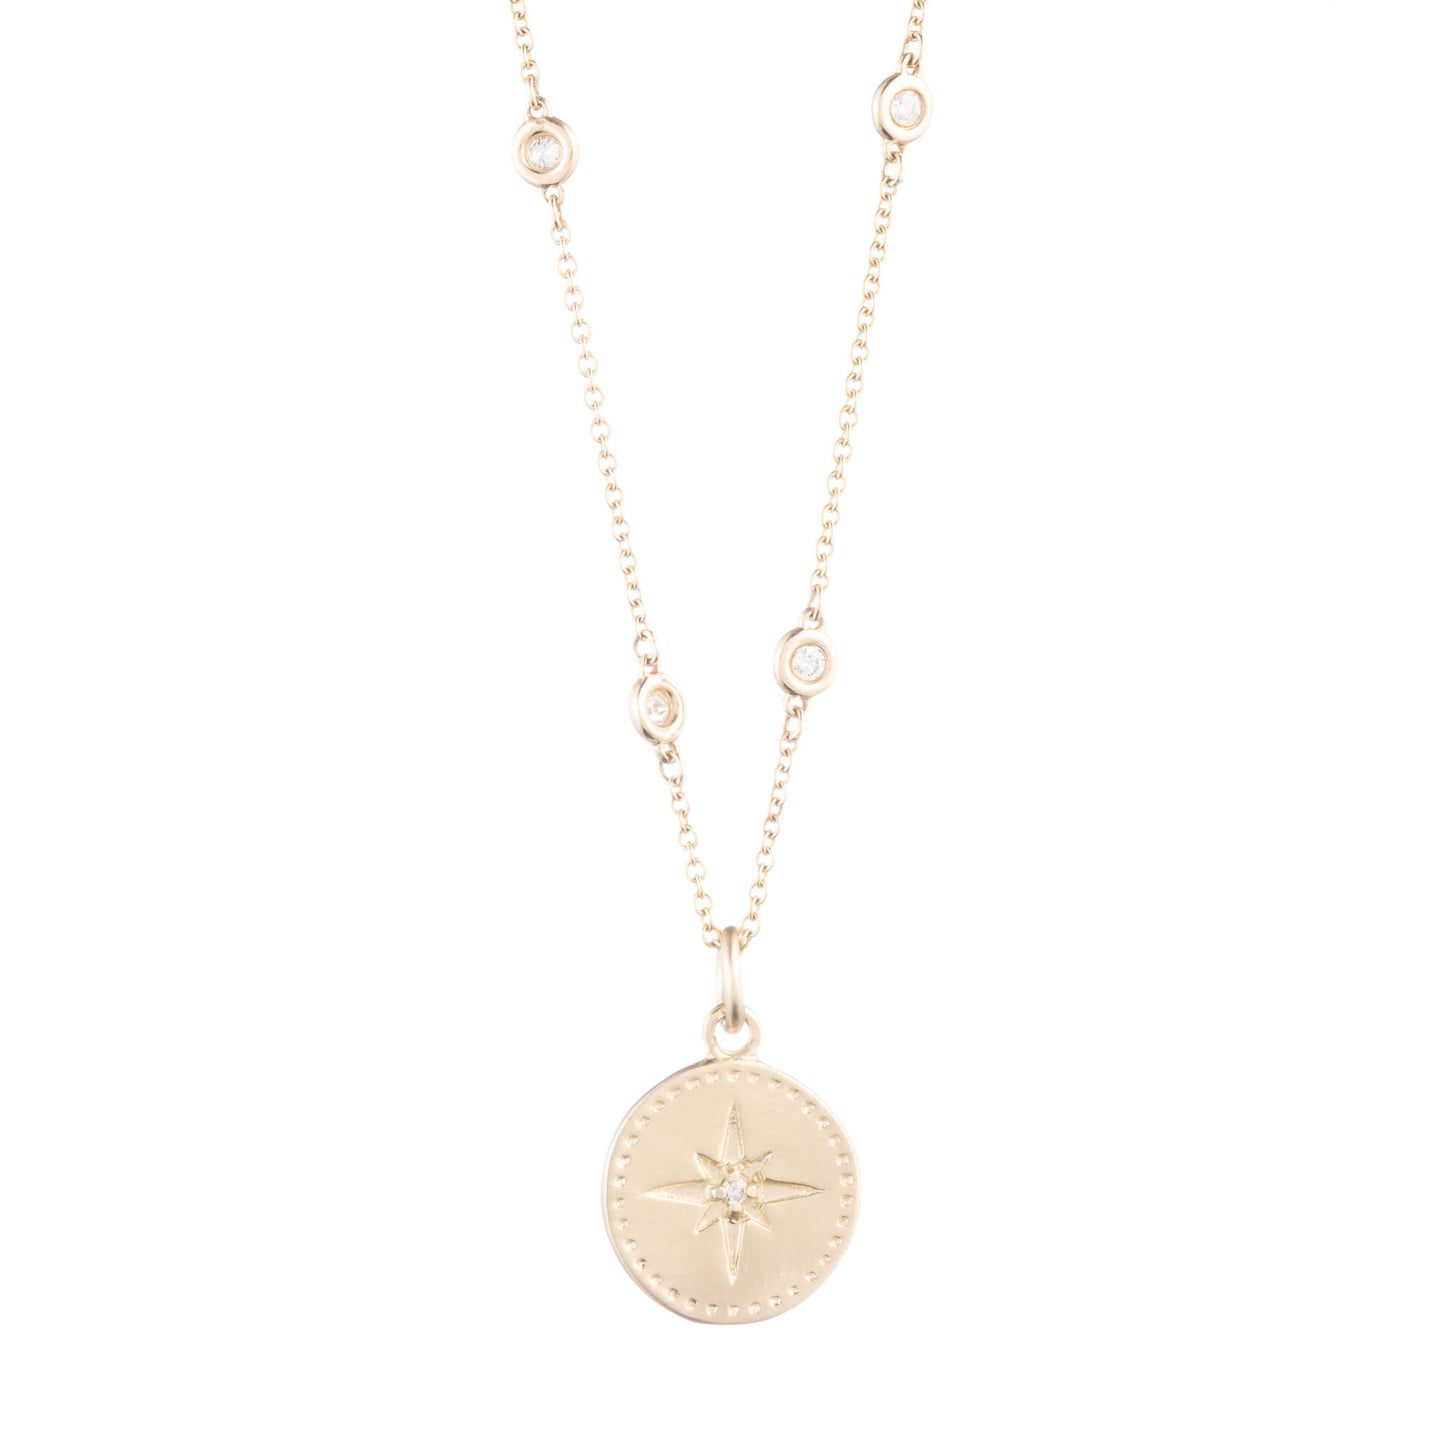 Nantucket Compass Charm in Gold